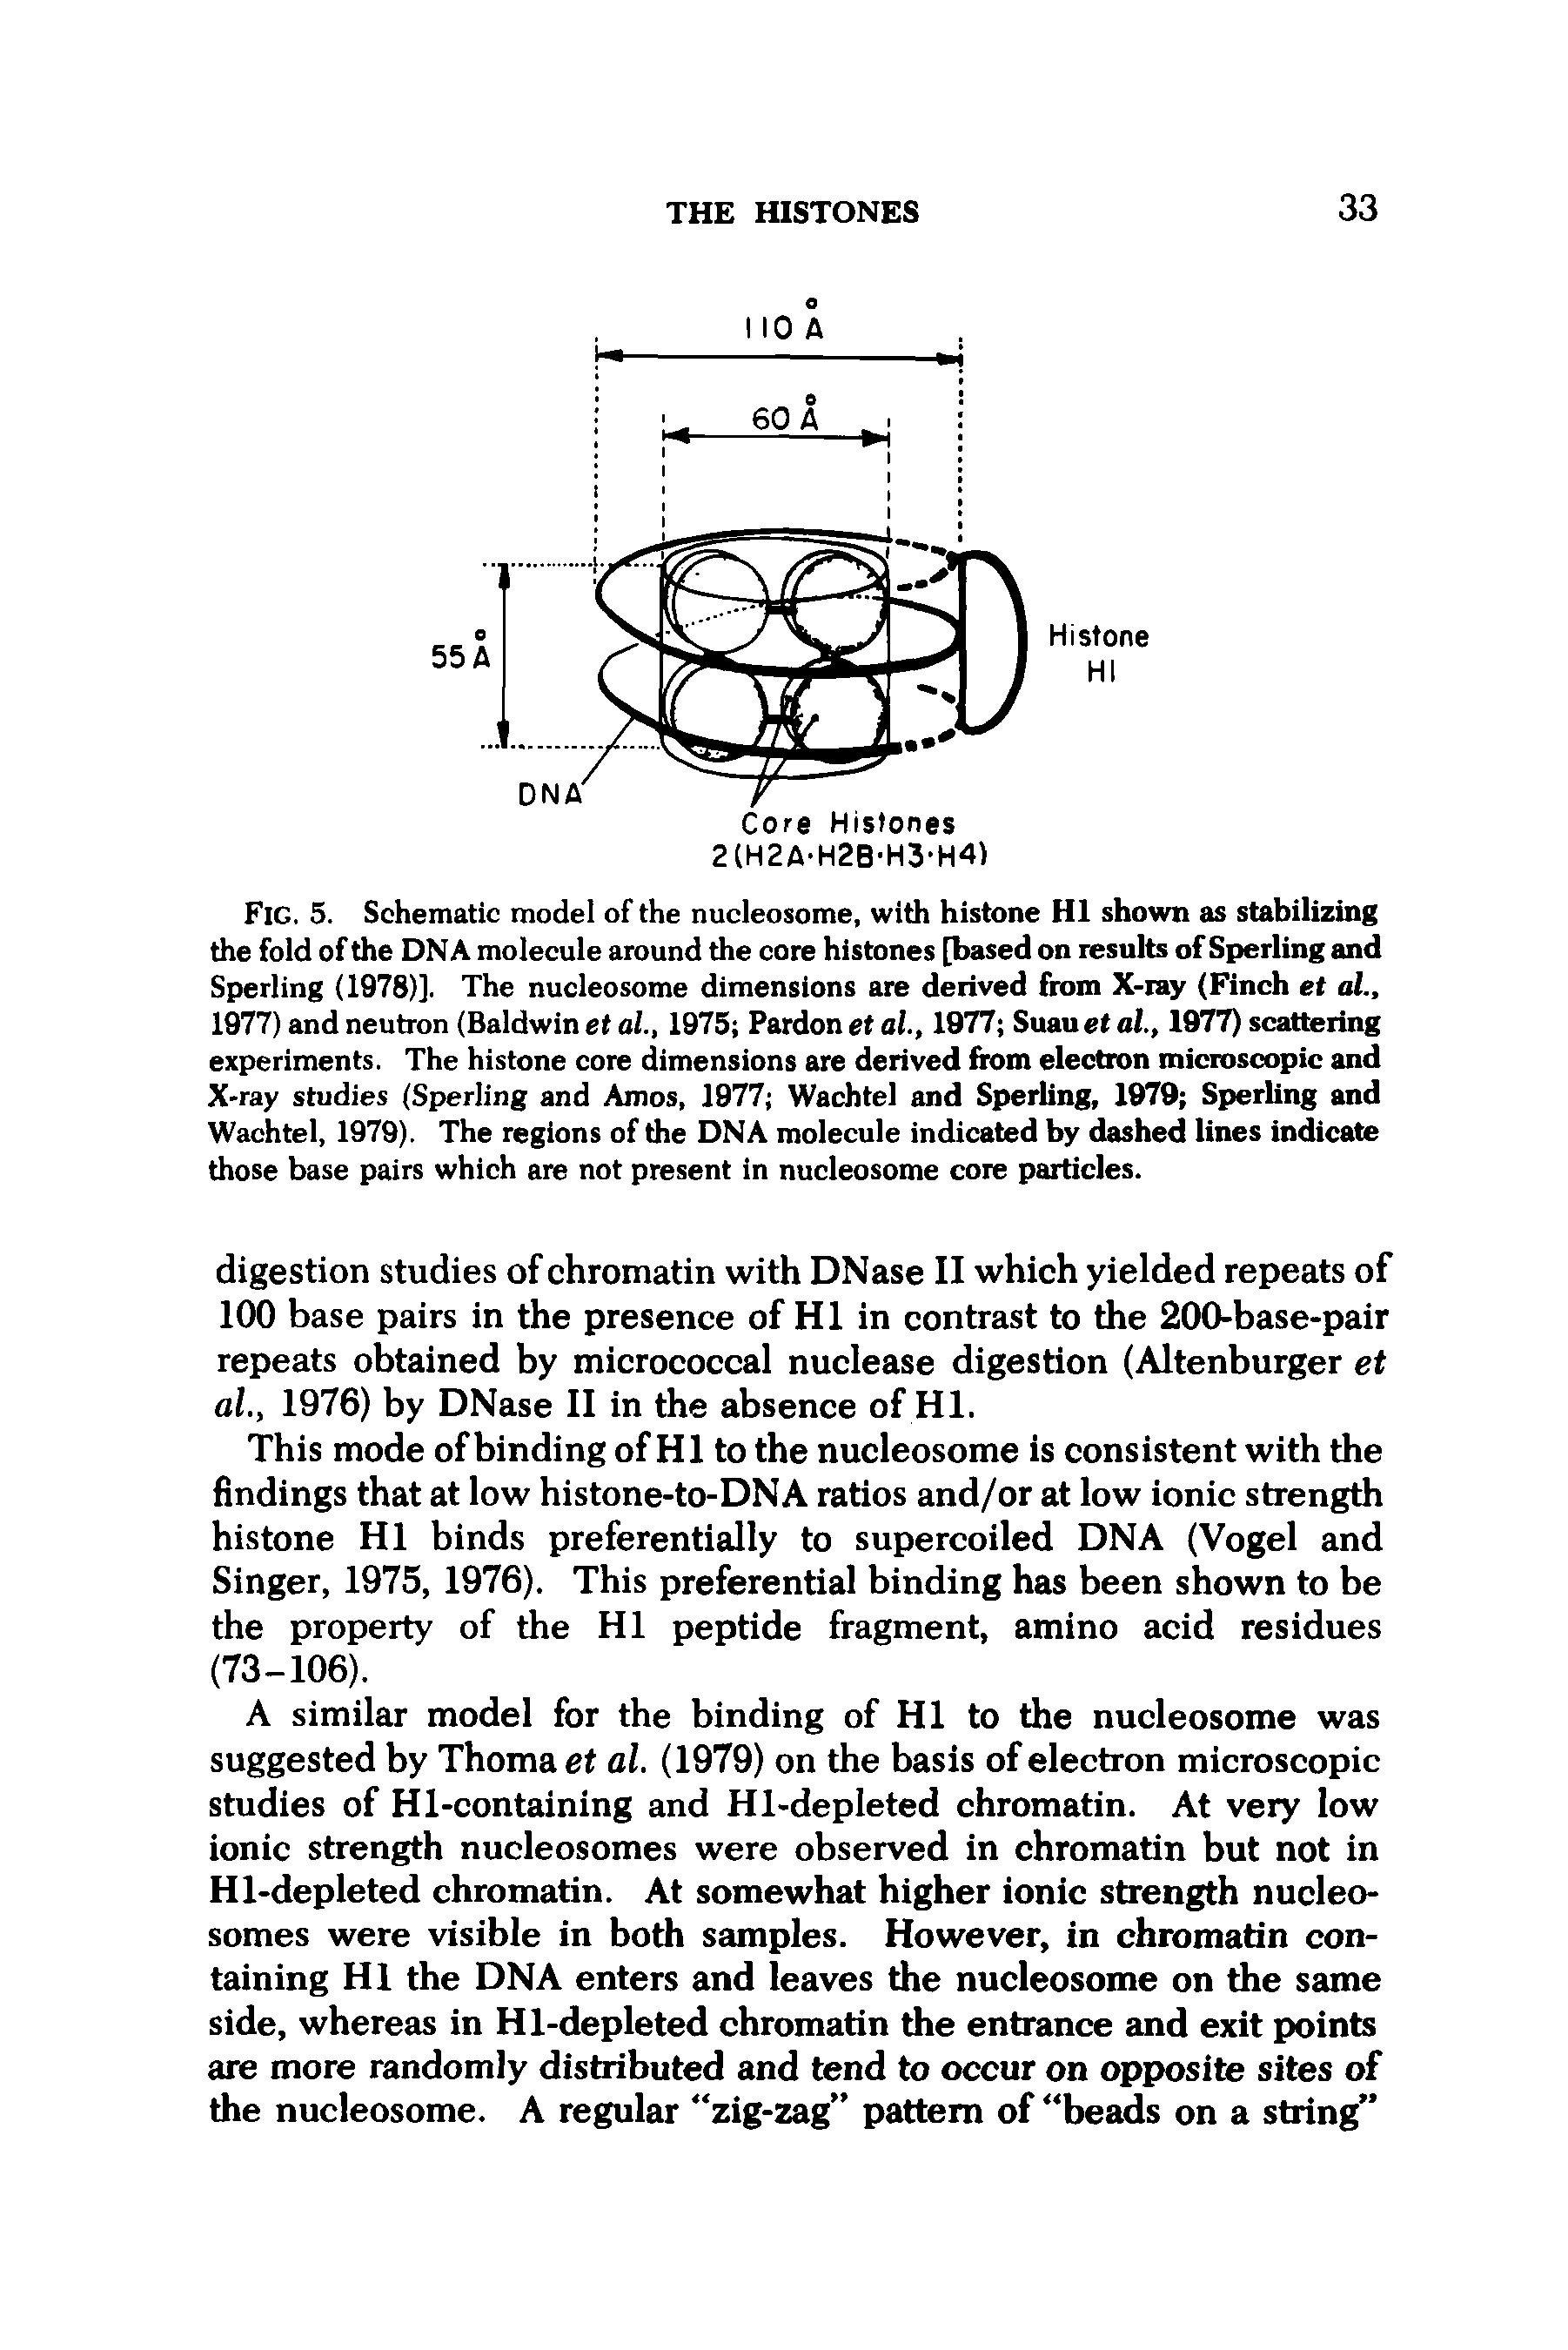 Fig. 5. Schematic model of the nucleosome, with histone HI shown as stabilizing the fold of the DNA molecule around the core histones [based on results of Sperling and Sperling (1978)]. The nucleosome dimensions are derived from X-ray (Finch et al., 1977) and neutron (Baldwin et al., 1975 Pardon et al., 1977 Suauet al., 1977) scattering experiments. The histone core dimensions are derived from electron microscopic and X-ray studies (Sperling and Amos, 1977 Wachtel and Sperling, 1979 Sperling and Wachtel, 1979). The regions of the DNA molecule indicated by dashed lines indicate those base pairs which are not present in nucleosome core particles.